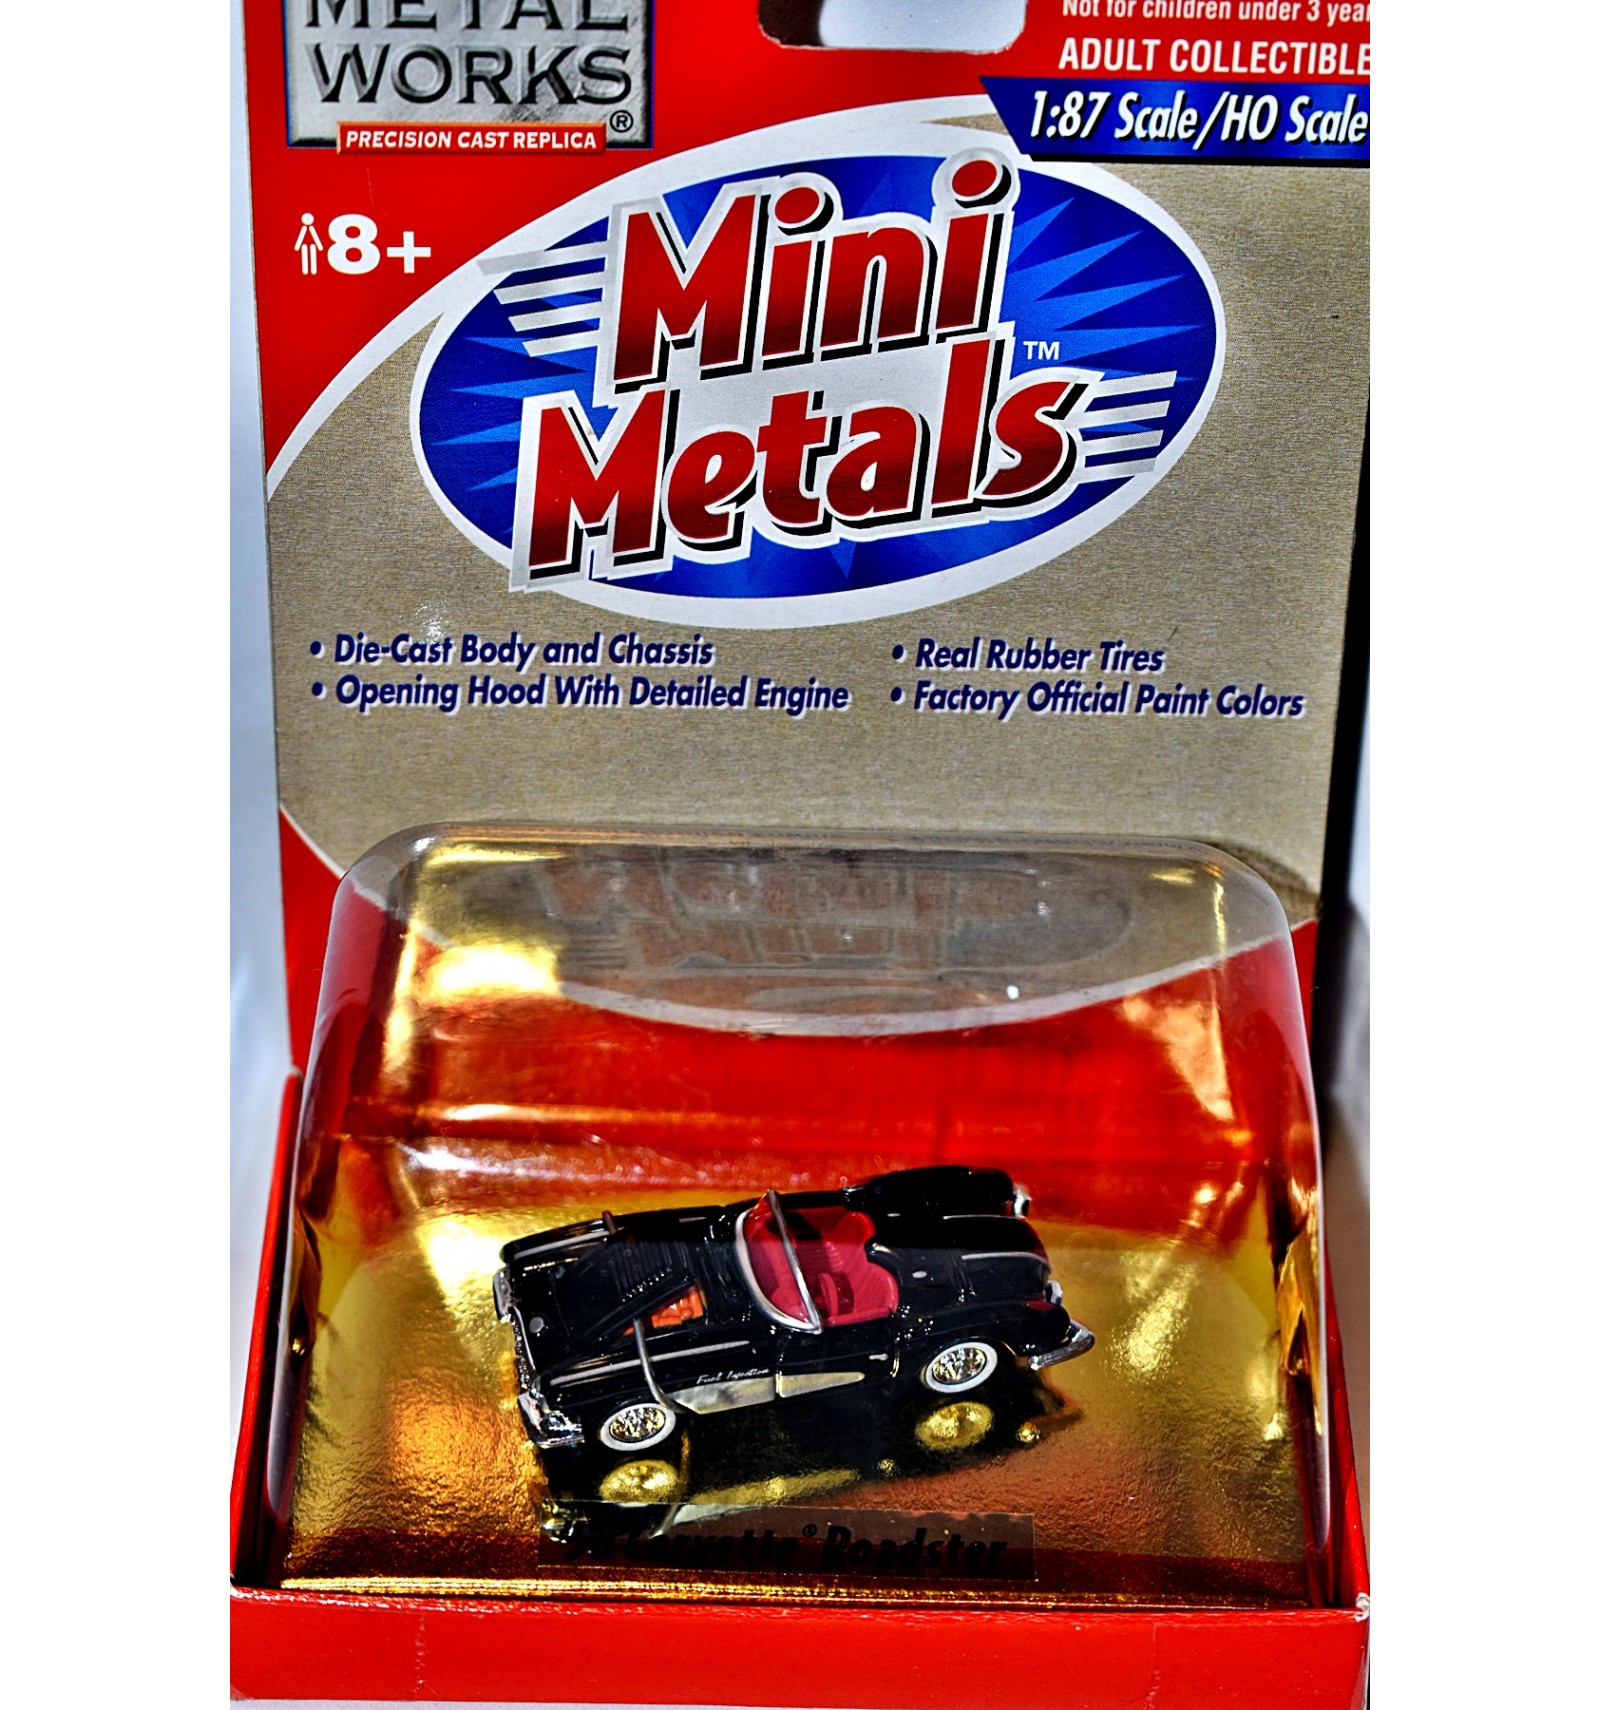 classic metal works ho scale vehicles